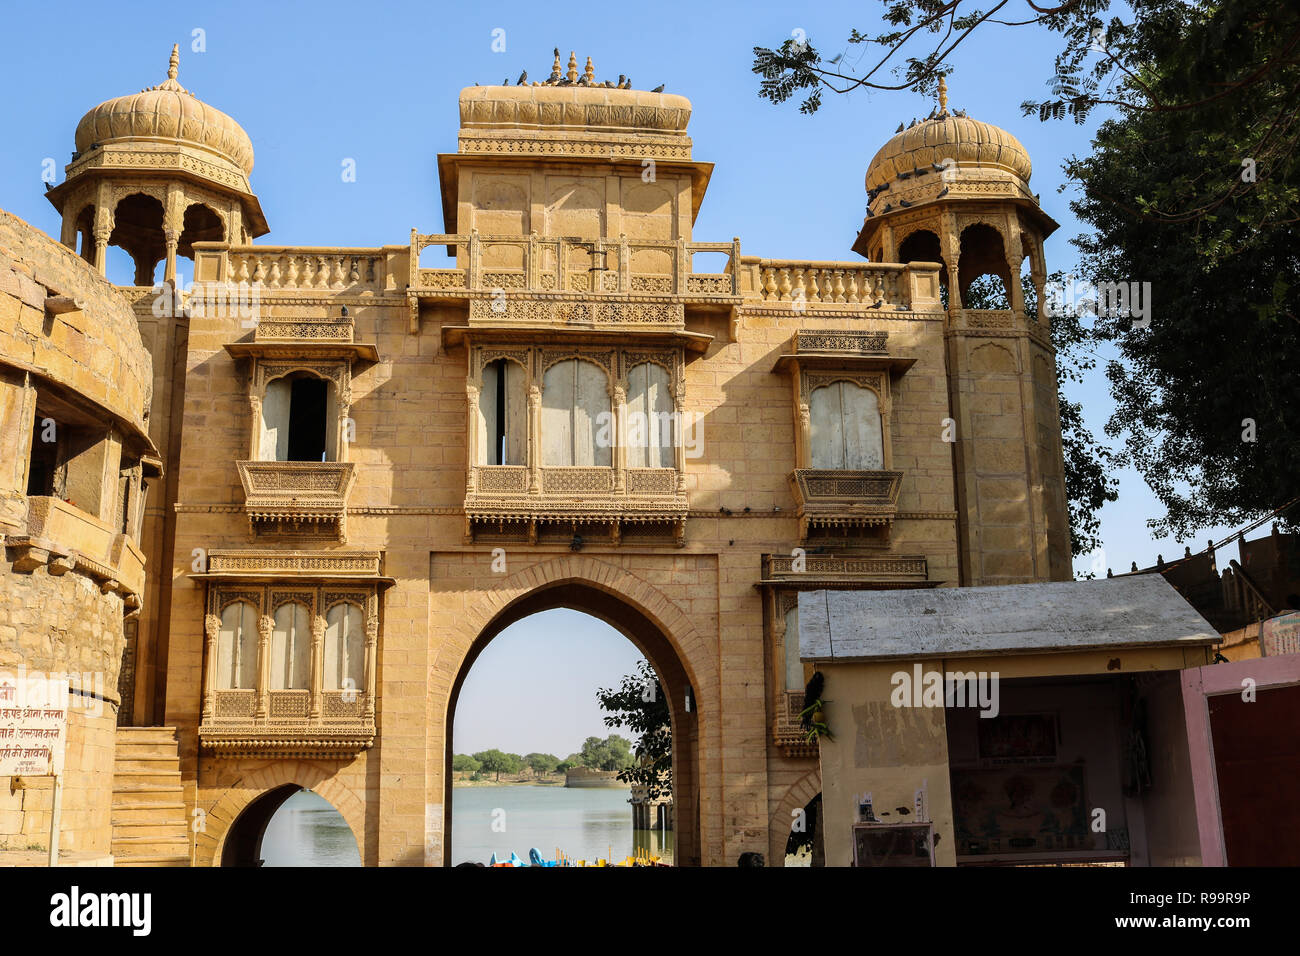 The Entrance Gate of Gadisar Lake, a man-made water reservoir in Jaisalmer. Constructed by the first ruler of Jaisalmer, Raja Rawal Jaisal. Stock Photo